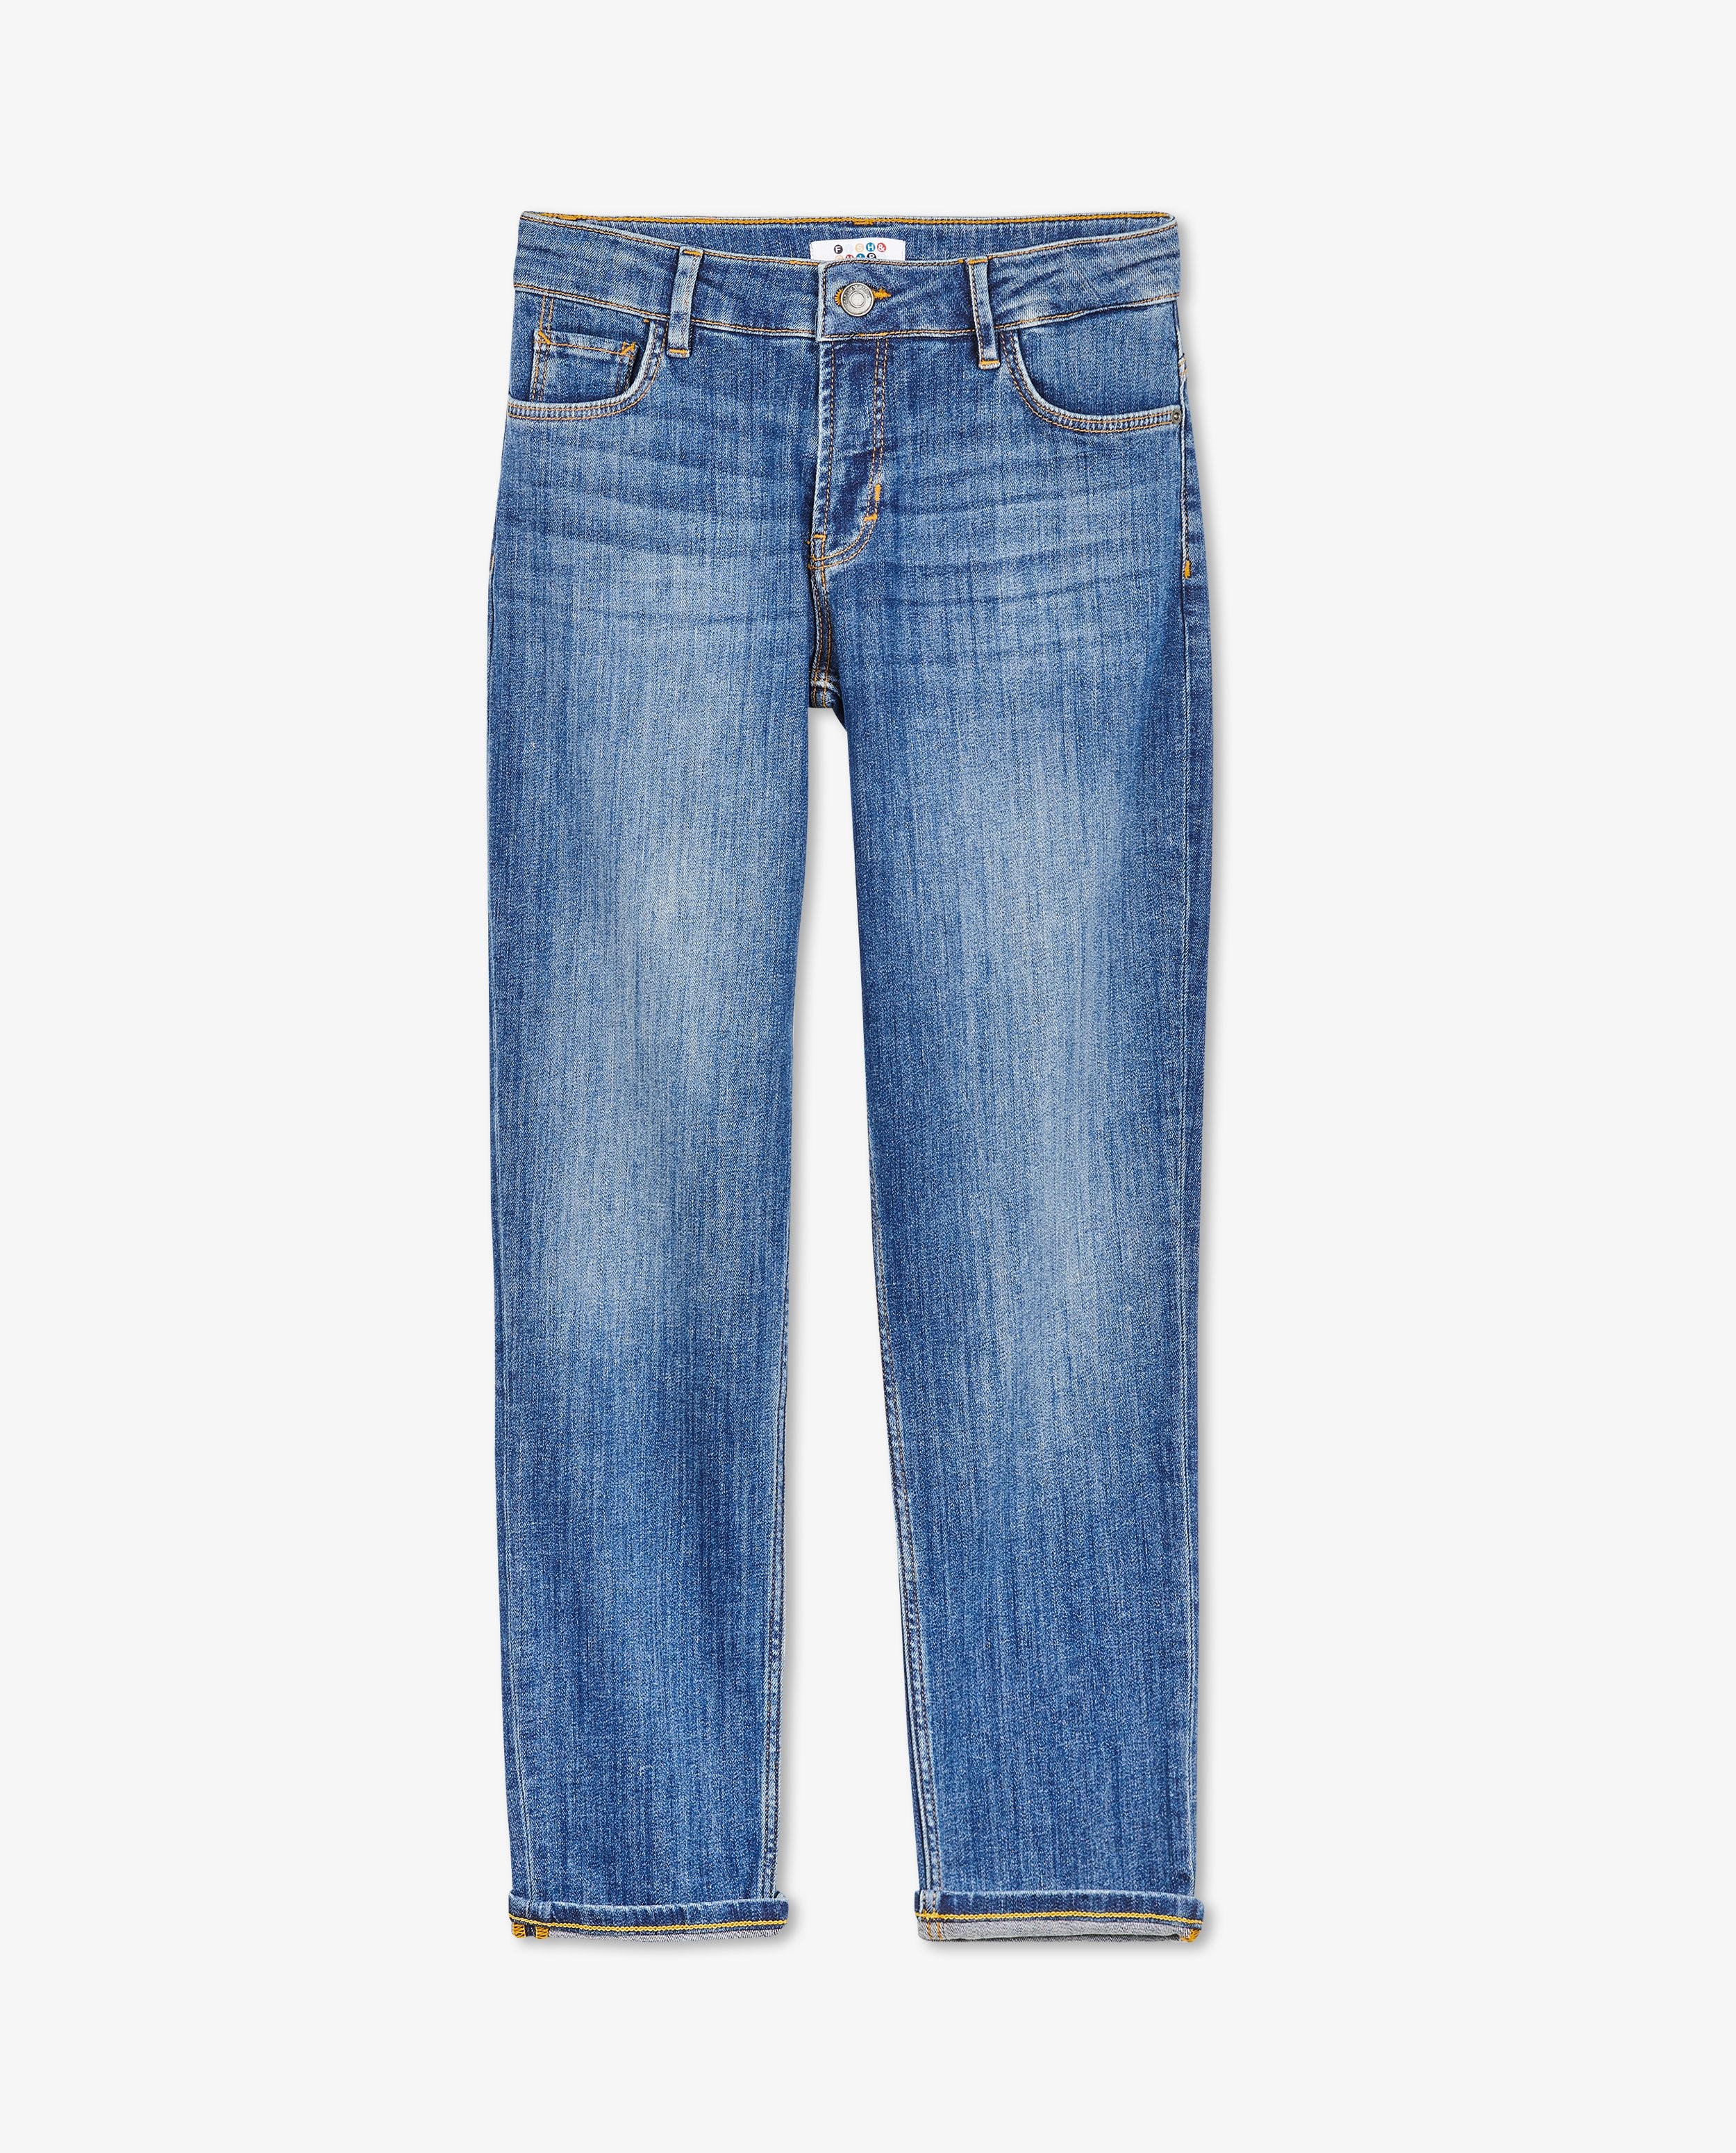 Jeans - Blauwe baggy jeans